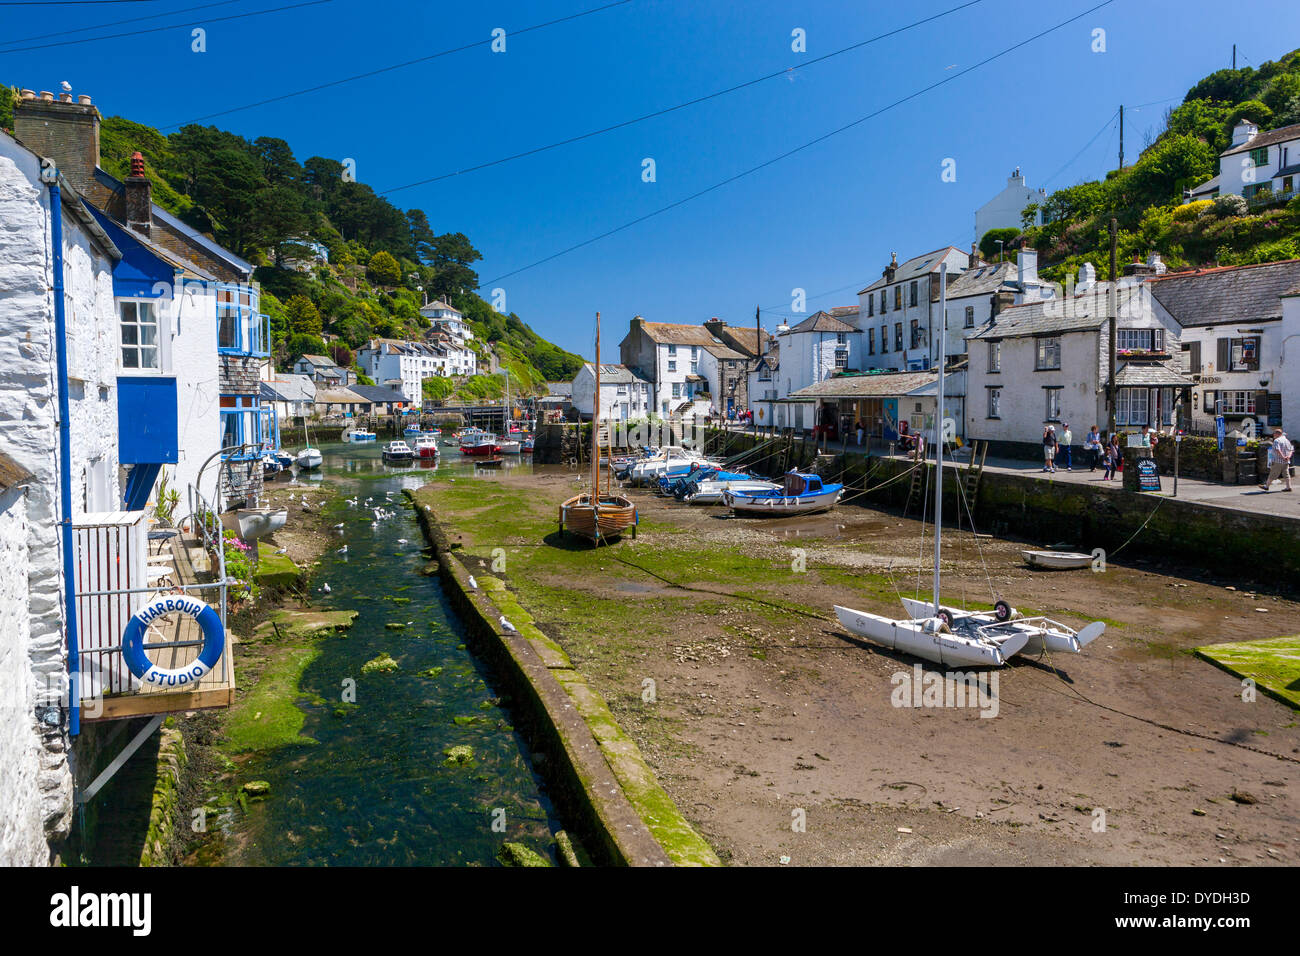 Boats moored at Polperro harbour. Stock Photo